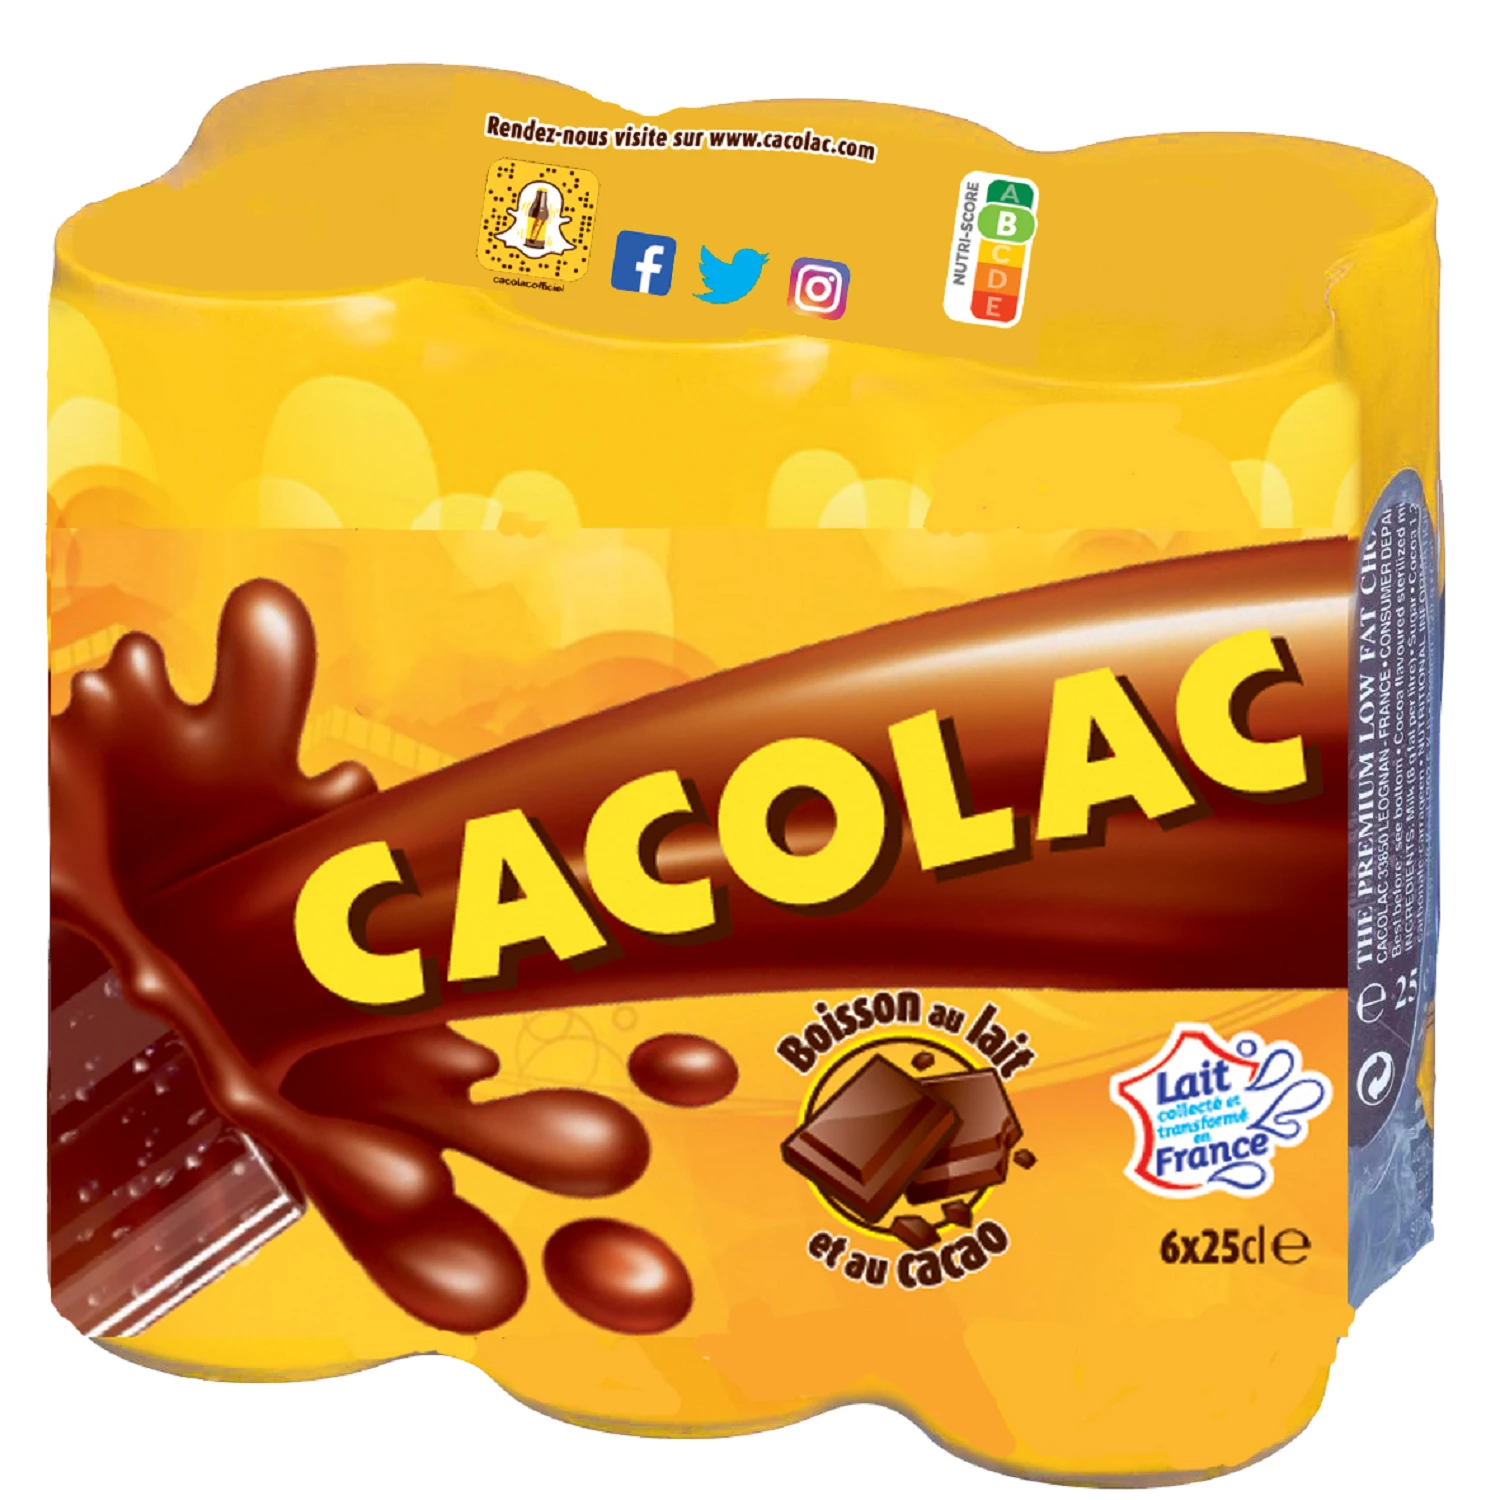 Cocoa milk drink 6x25cl - CACOLAC